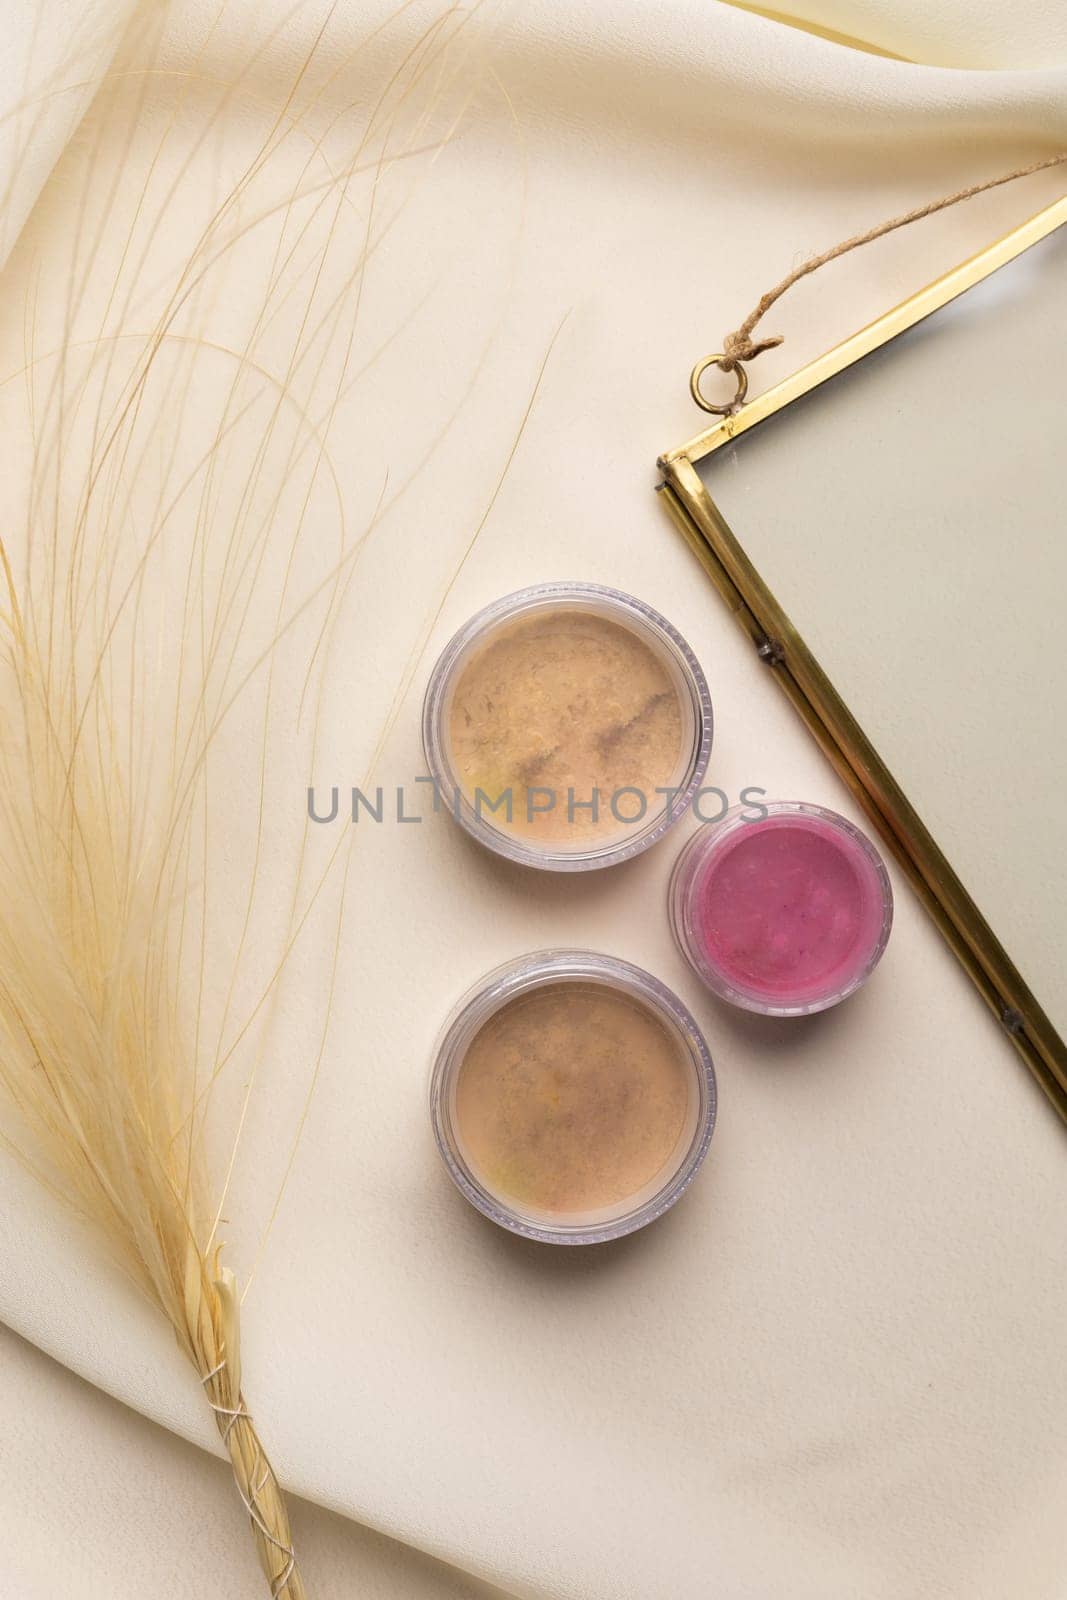 Cosmetics facial powder and blush for cheeks on natural background with dried flowers. Makeup accessories top view by Satura86